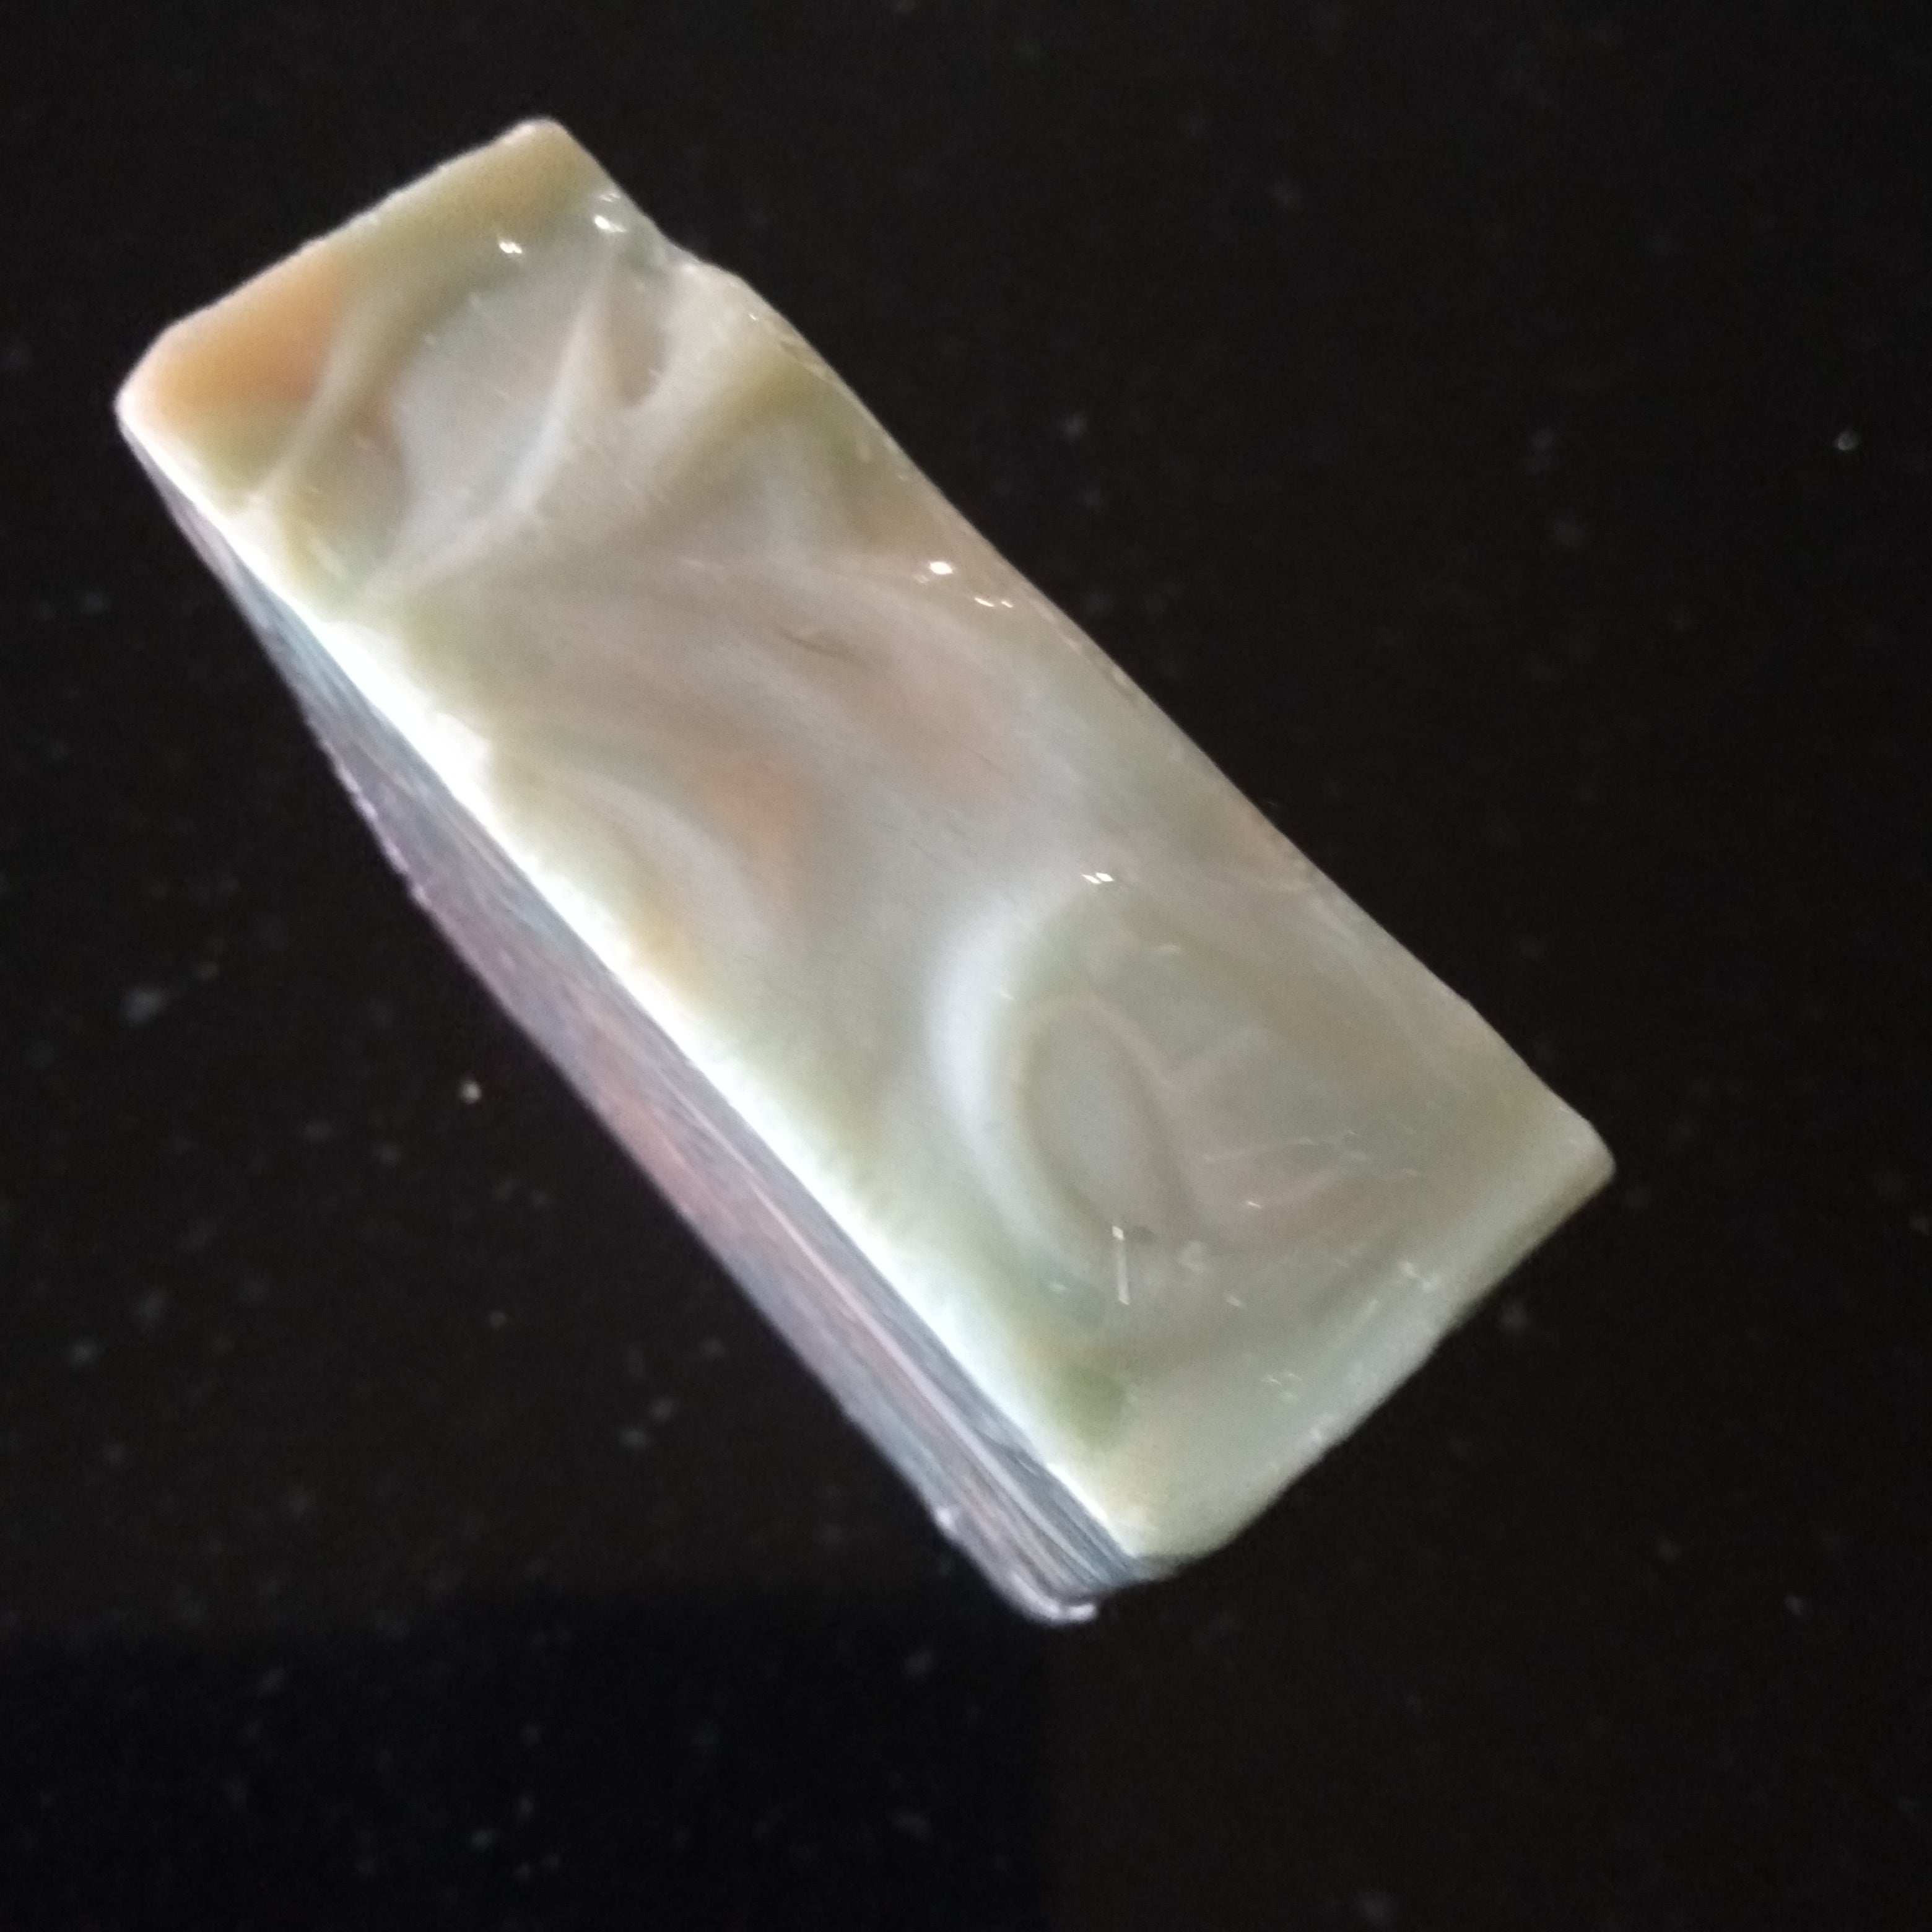 PATCHOULI, ROSEMARY & ORANGE - Hand-made Cold-process Soap